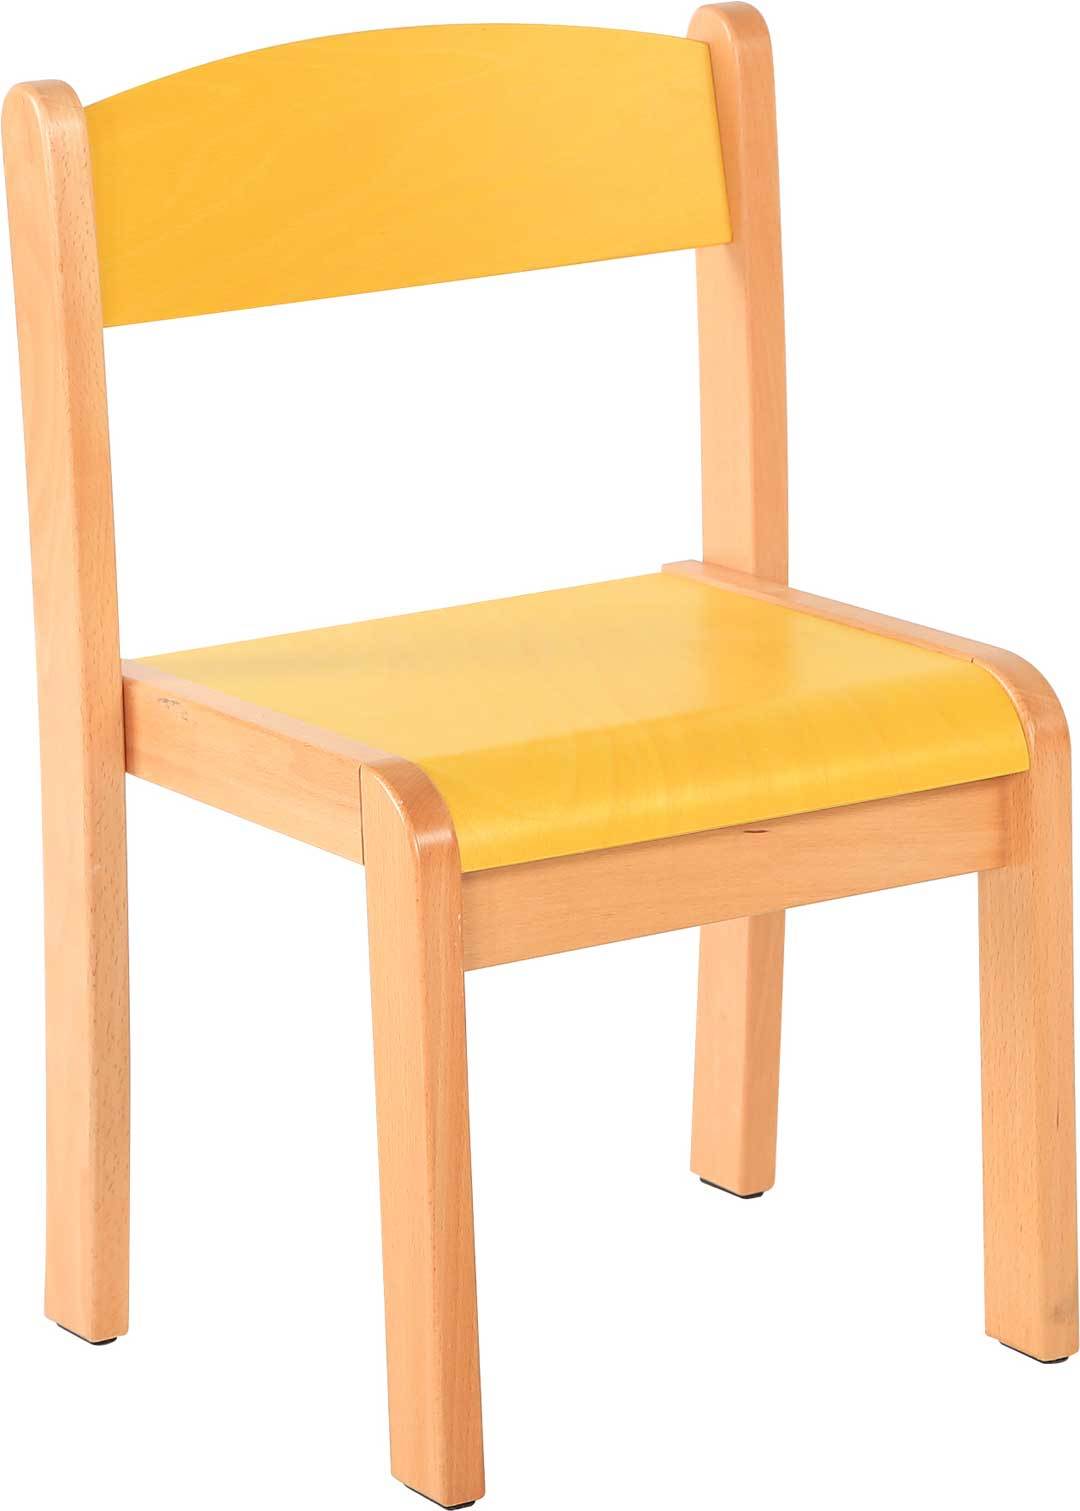 Philip Wooden Chair - All Heights & All Colours